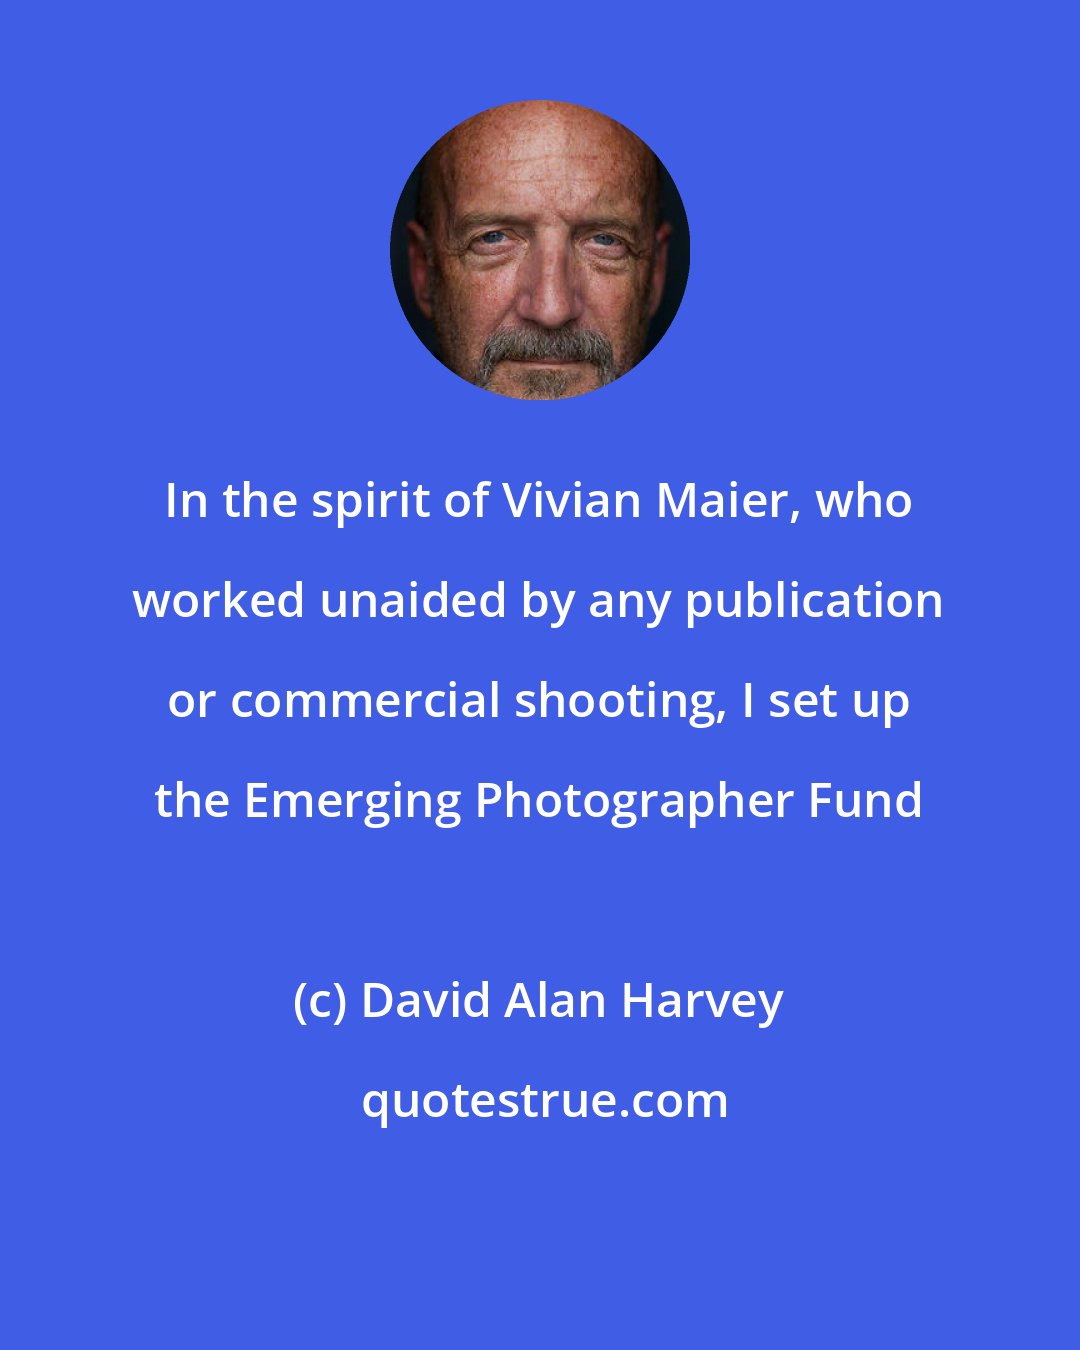 David Alan Harvey: In the spirit of Vivian Maier, who worked unaided by any publication or commercial shooting, I set up the Emerging Photographer Fund